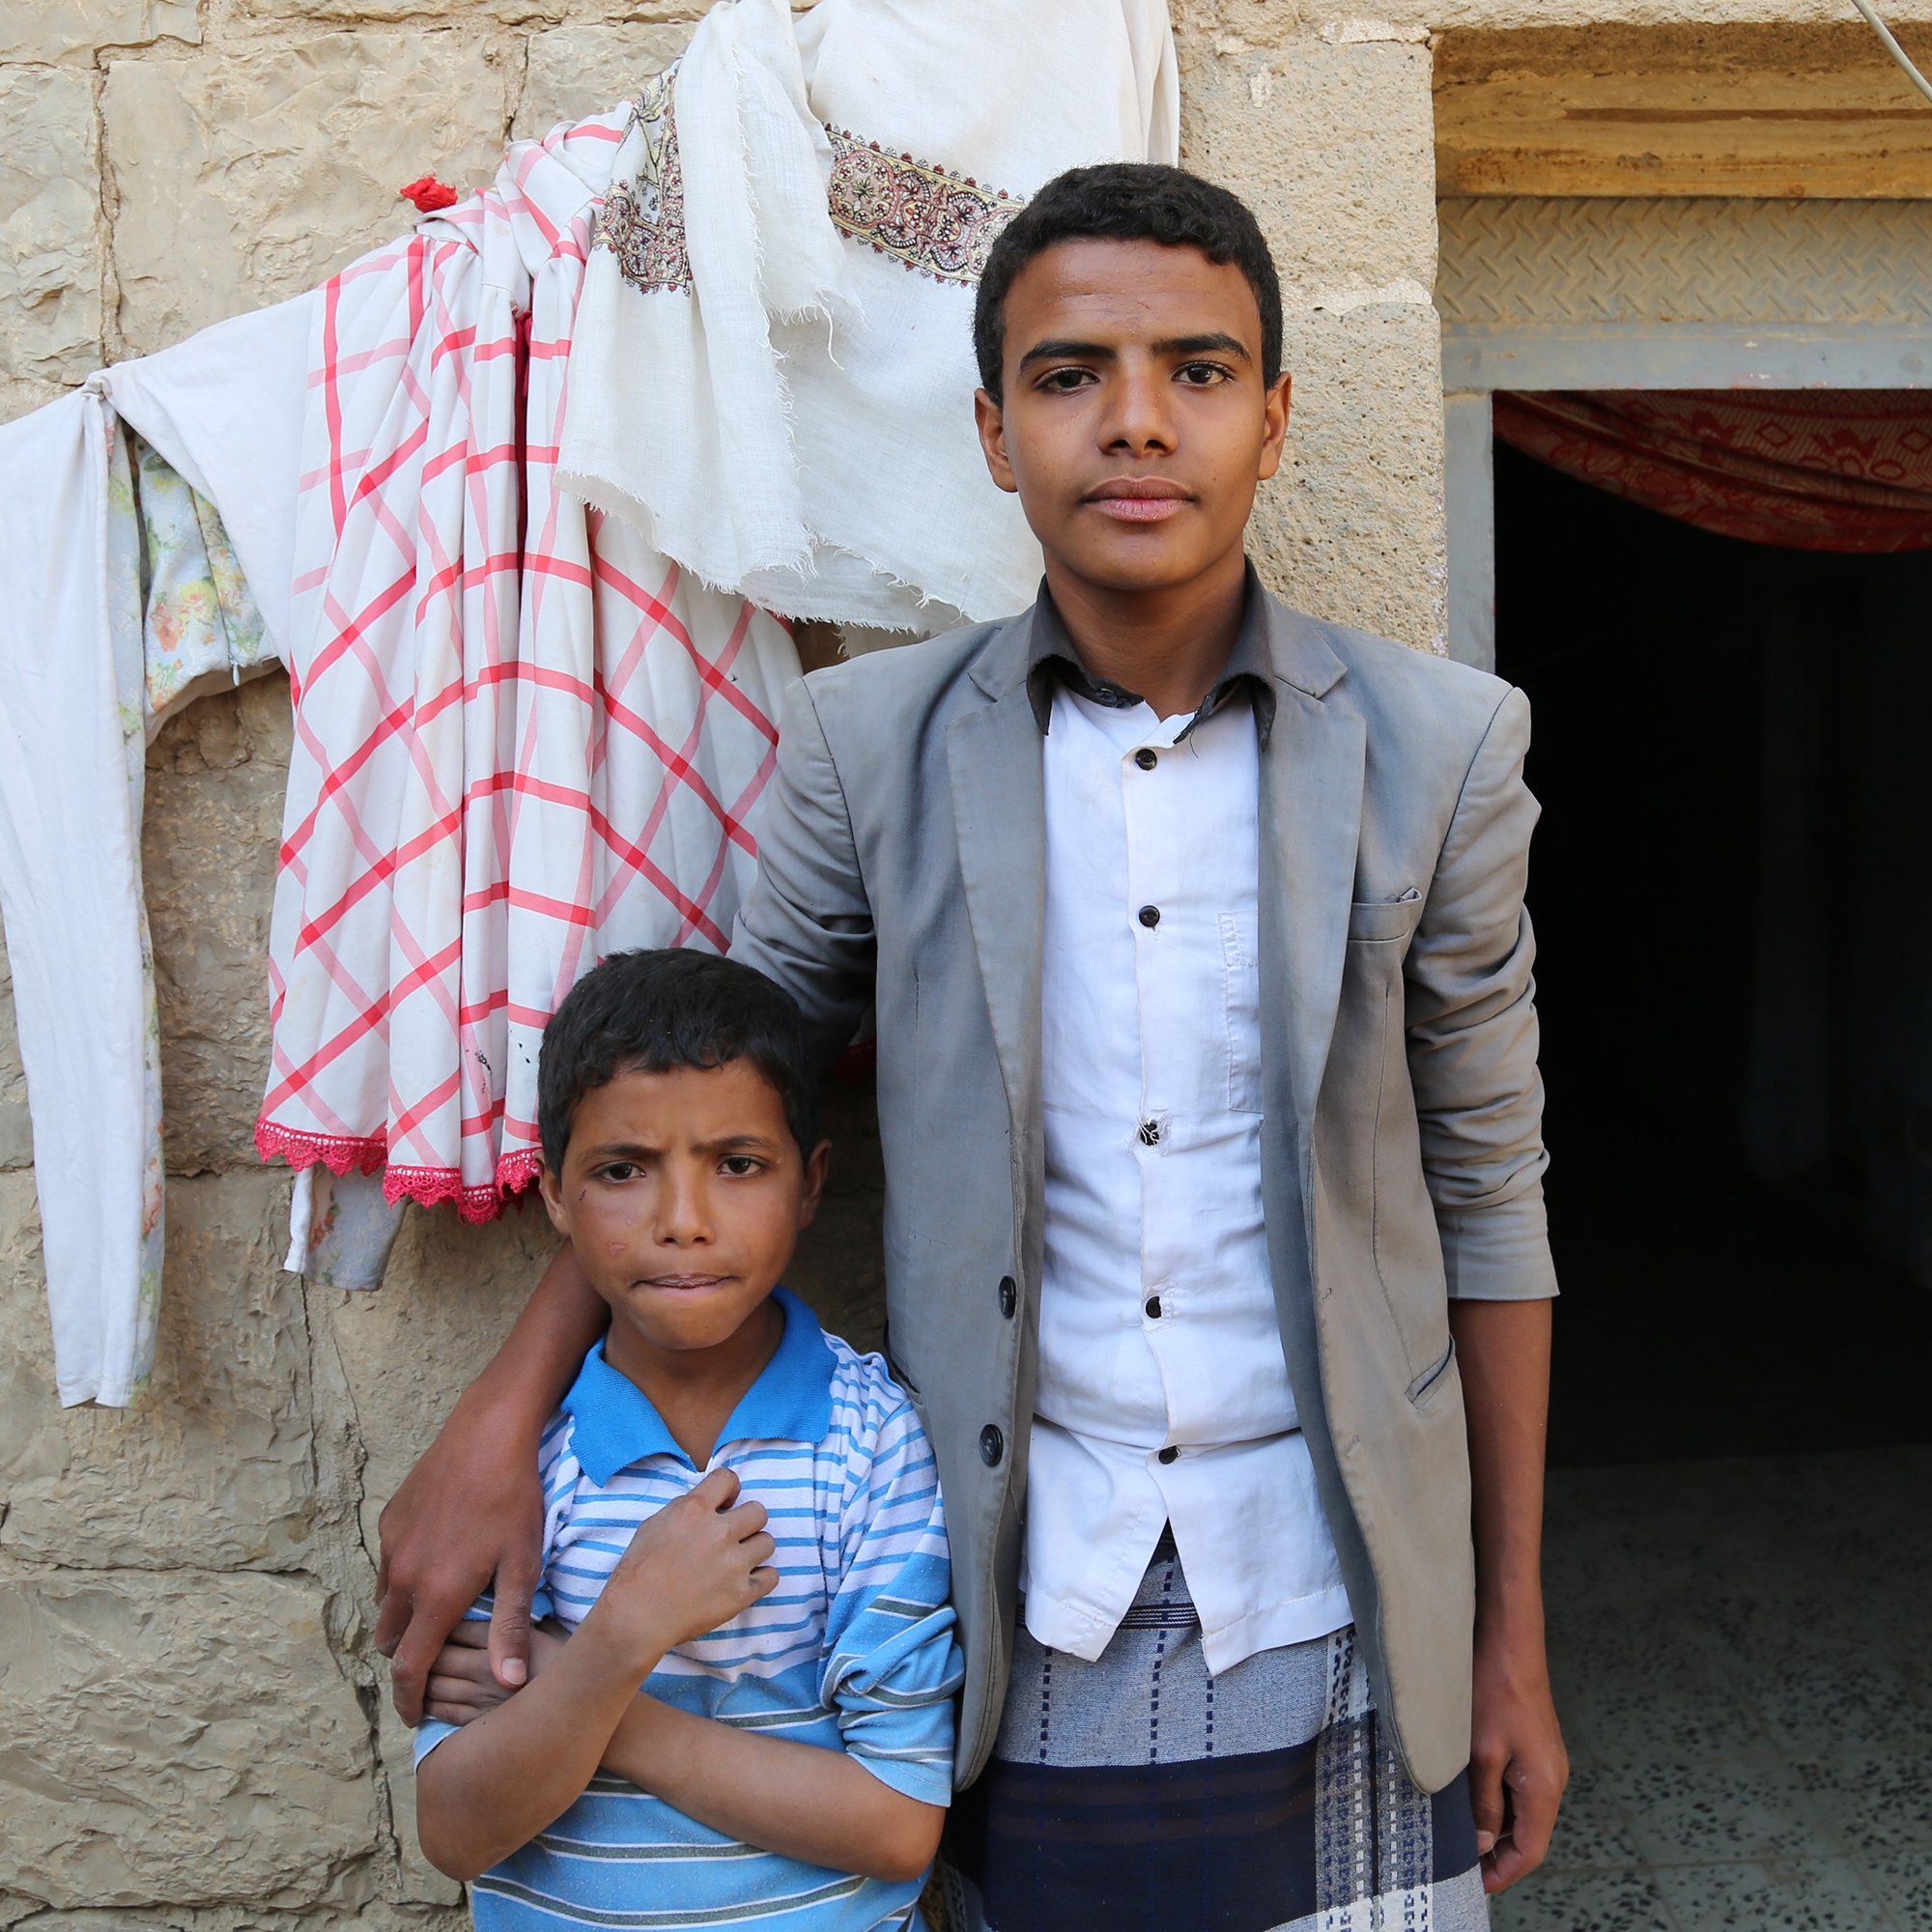 Hamza*, 16, with his brother Hani*, 12, outside their home in Amran, Yemen. Hamza*, helps provide for his mother and five siblings. He was injured on the first day of airstrikes in Sana'a when a shell injured him and broke his leg. Photo Credit: Mohammed Awadh/Save the Children.